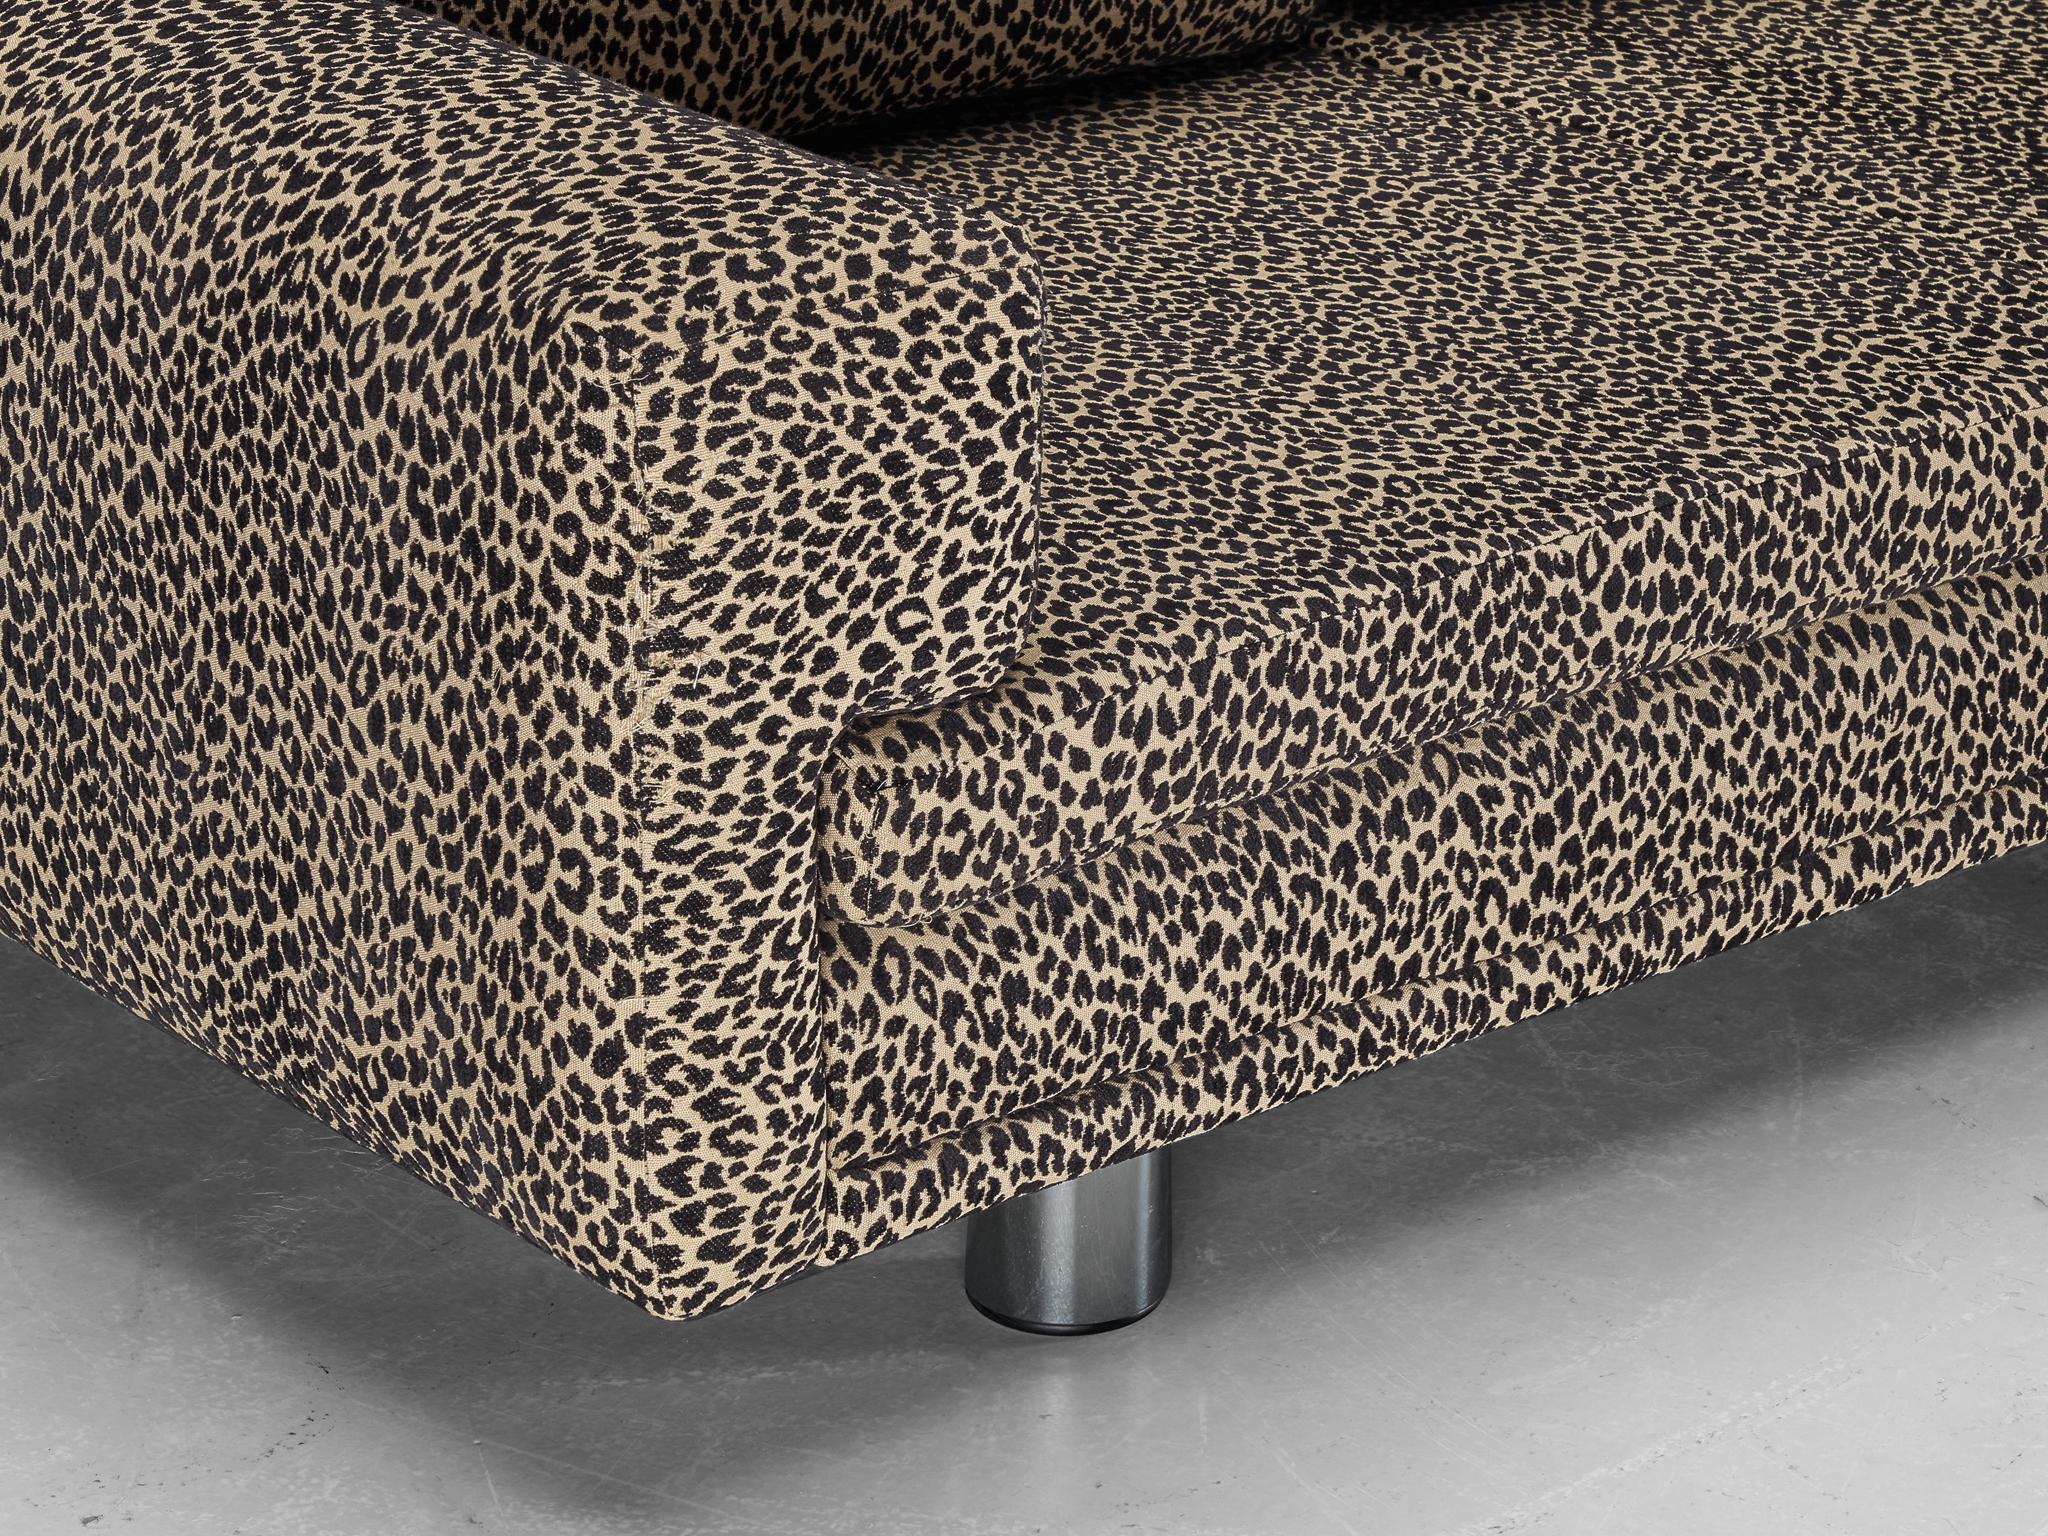 Howard Keith 'Diplomat' Sofa in Leopard Print Upholstery  In Good Condition For Sale In Waalwijk, NL